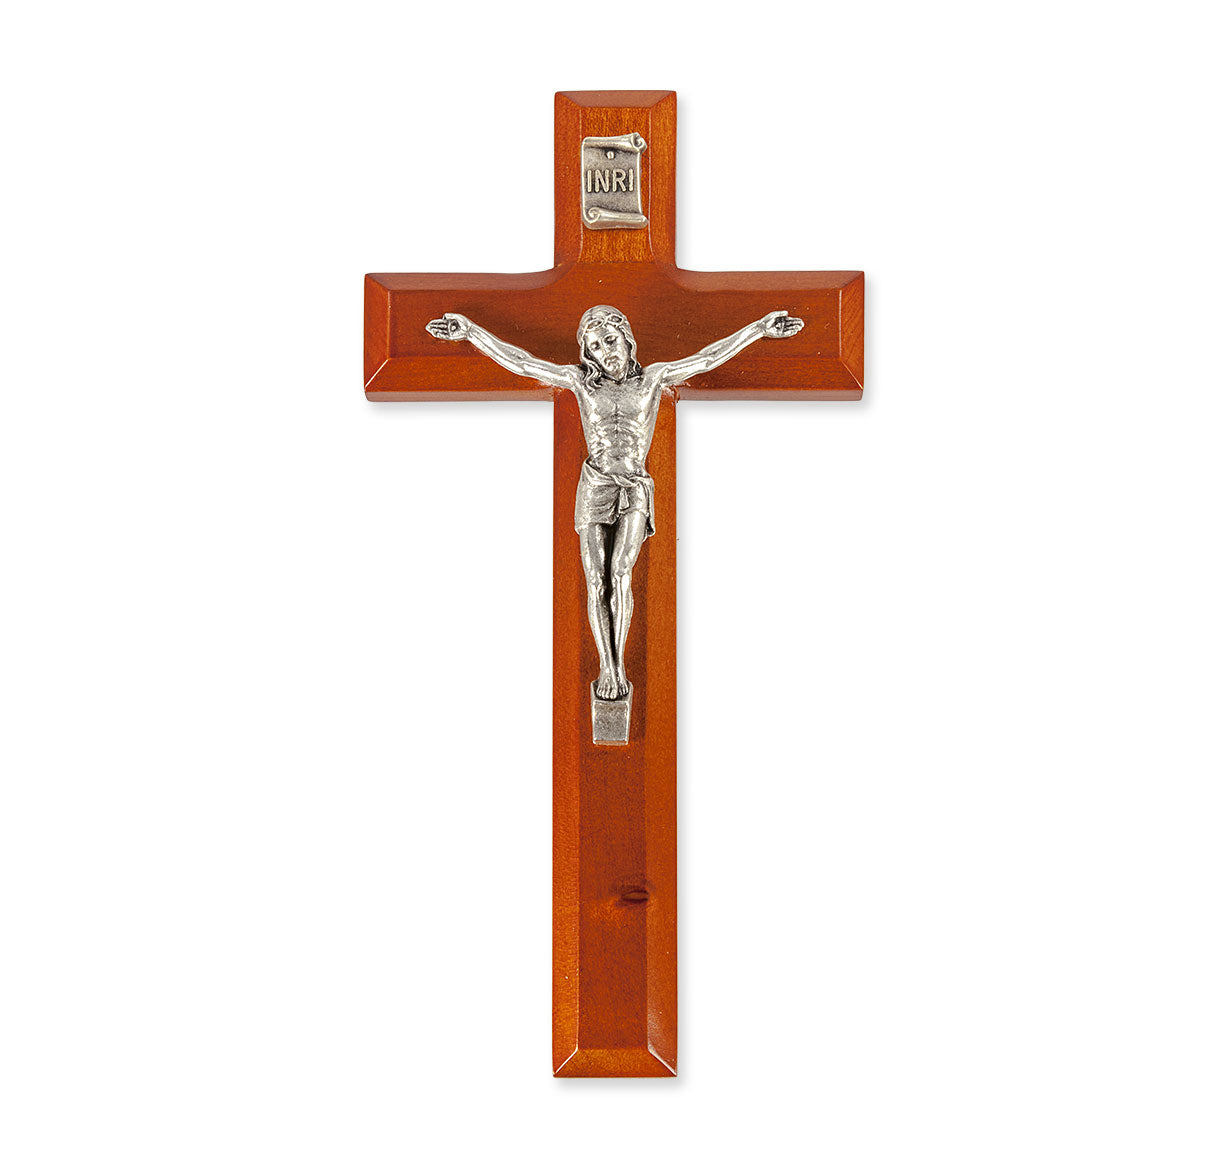 Medium Catholic Natural Cherry Wood Crucifix, 7", for Home, Office, Over Door